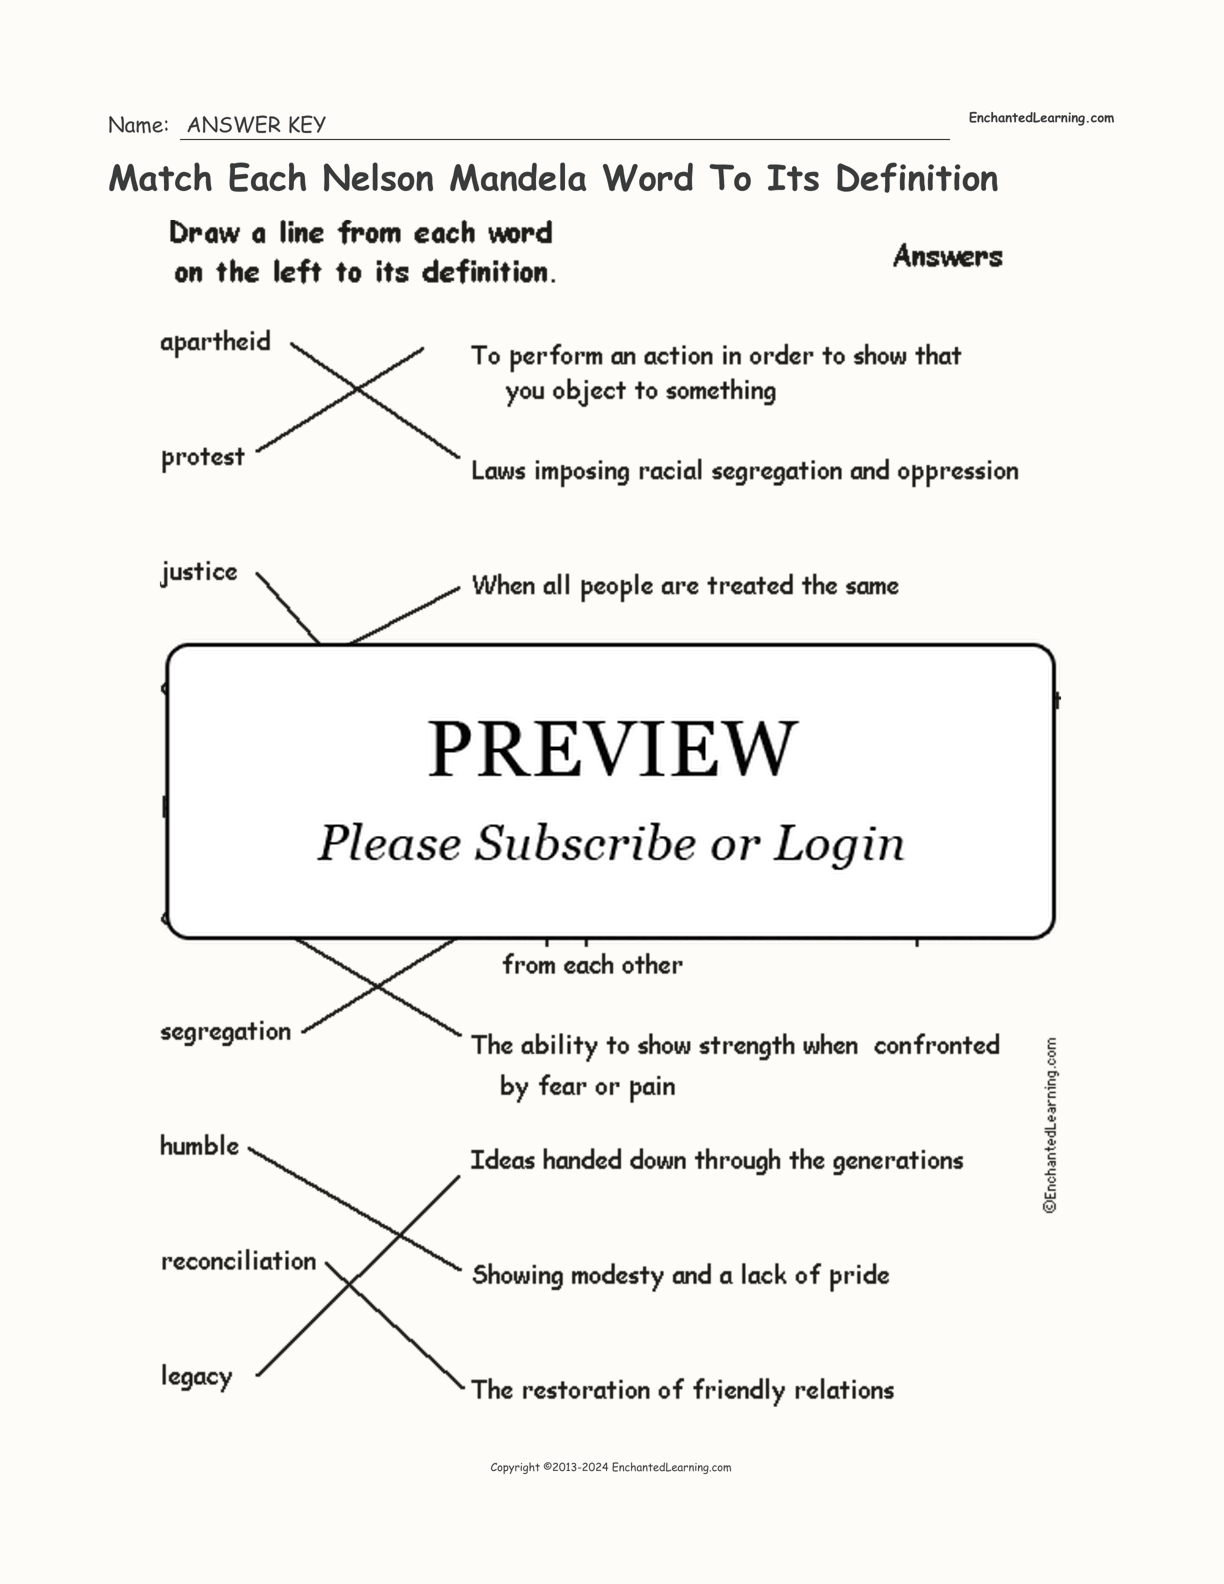 Match Each Nelson Mandela Word To Its Definition interactive worksheet page 2